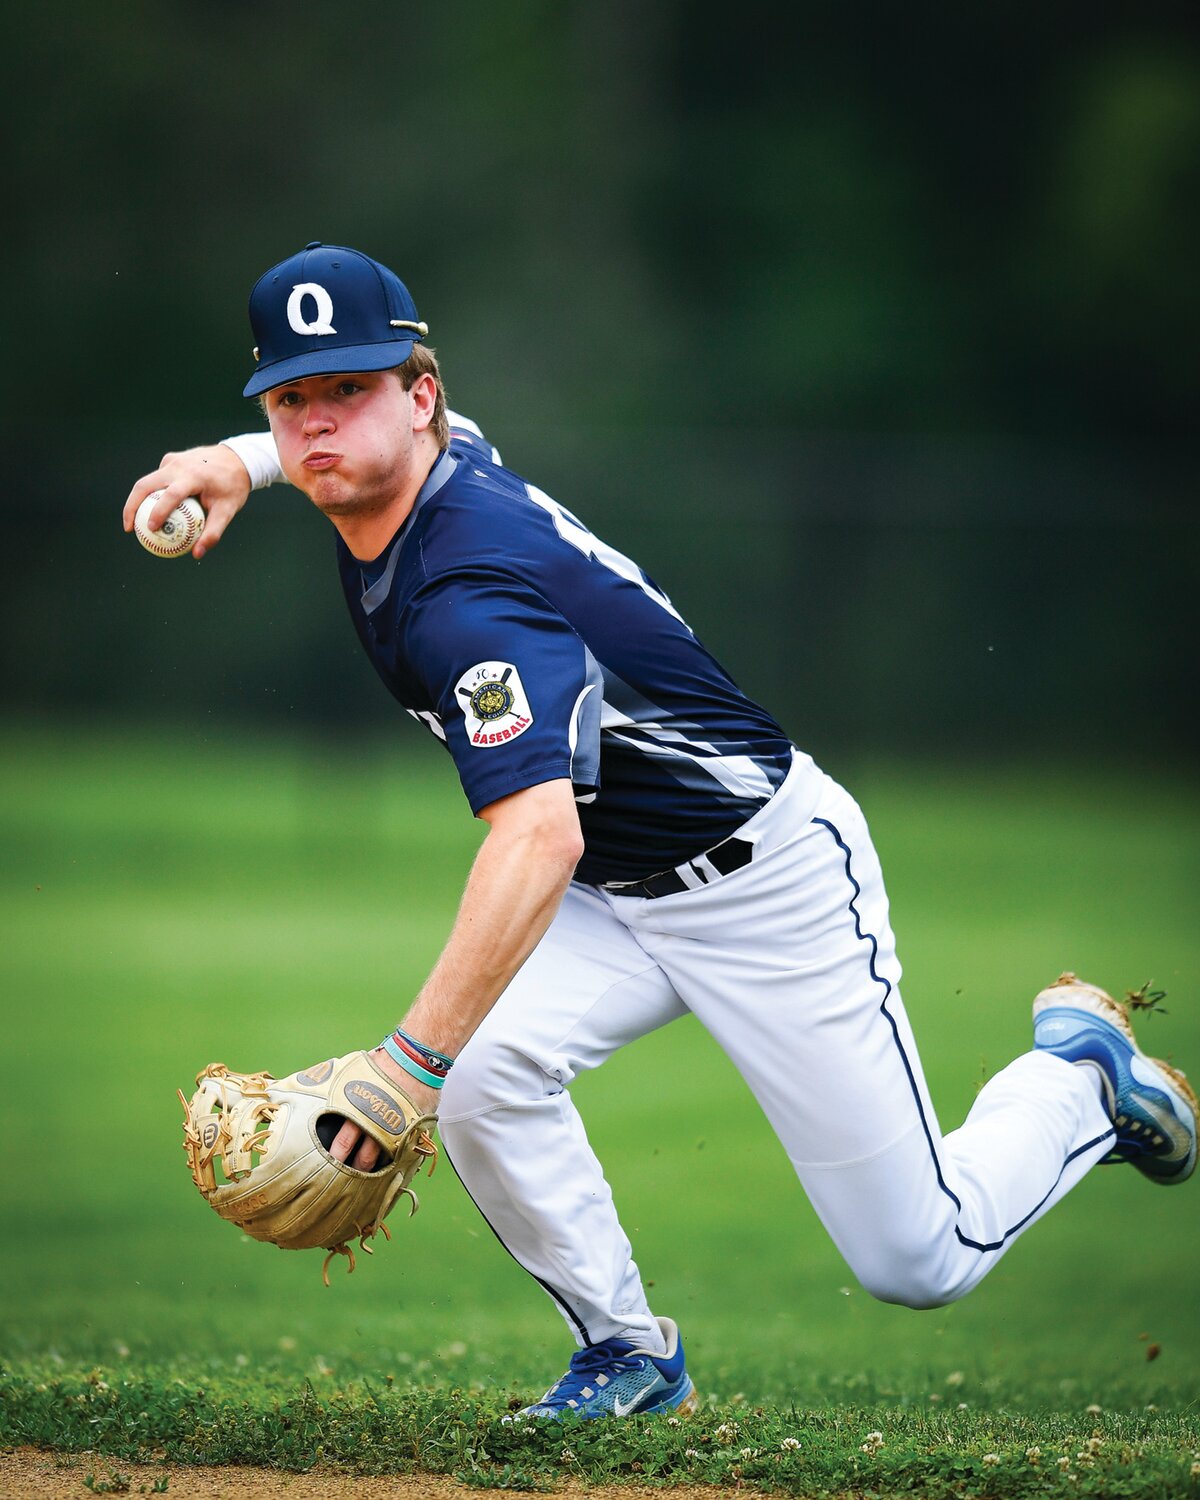 Quakertown second baseman Carter Kochel fields a grounder in the first inning of Monday’s game against Nor-Gwyn.